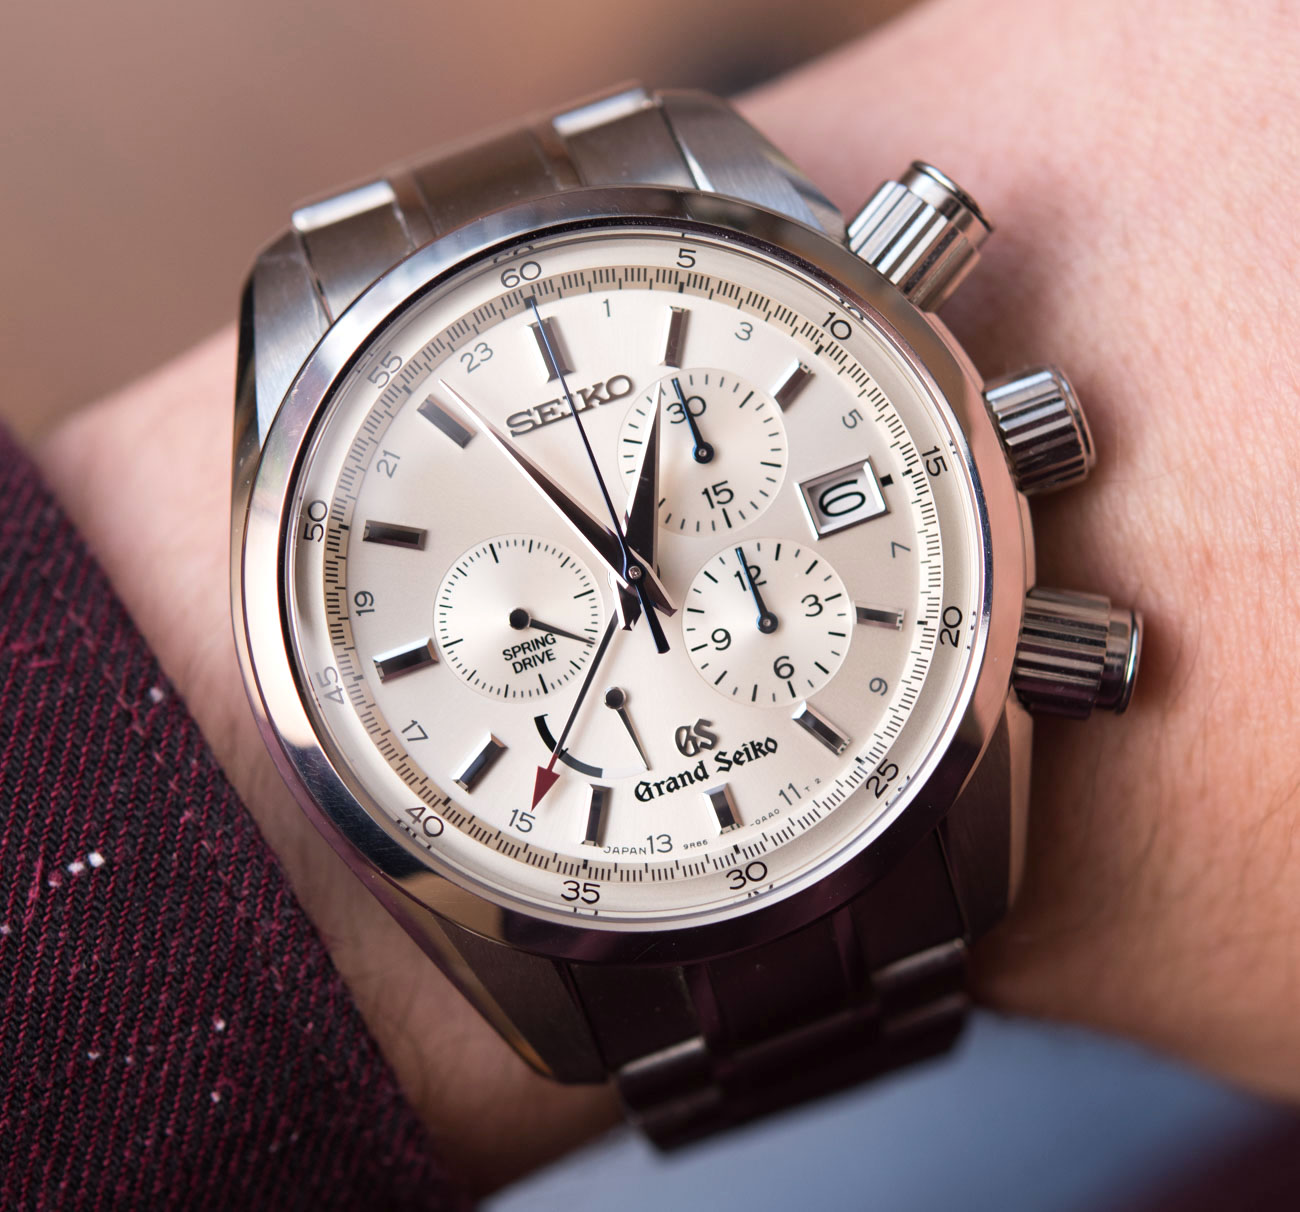 Grand Seiko Spring Drive Chronograph SBGC001 Watch Review | Page 3 of 3 ...